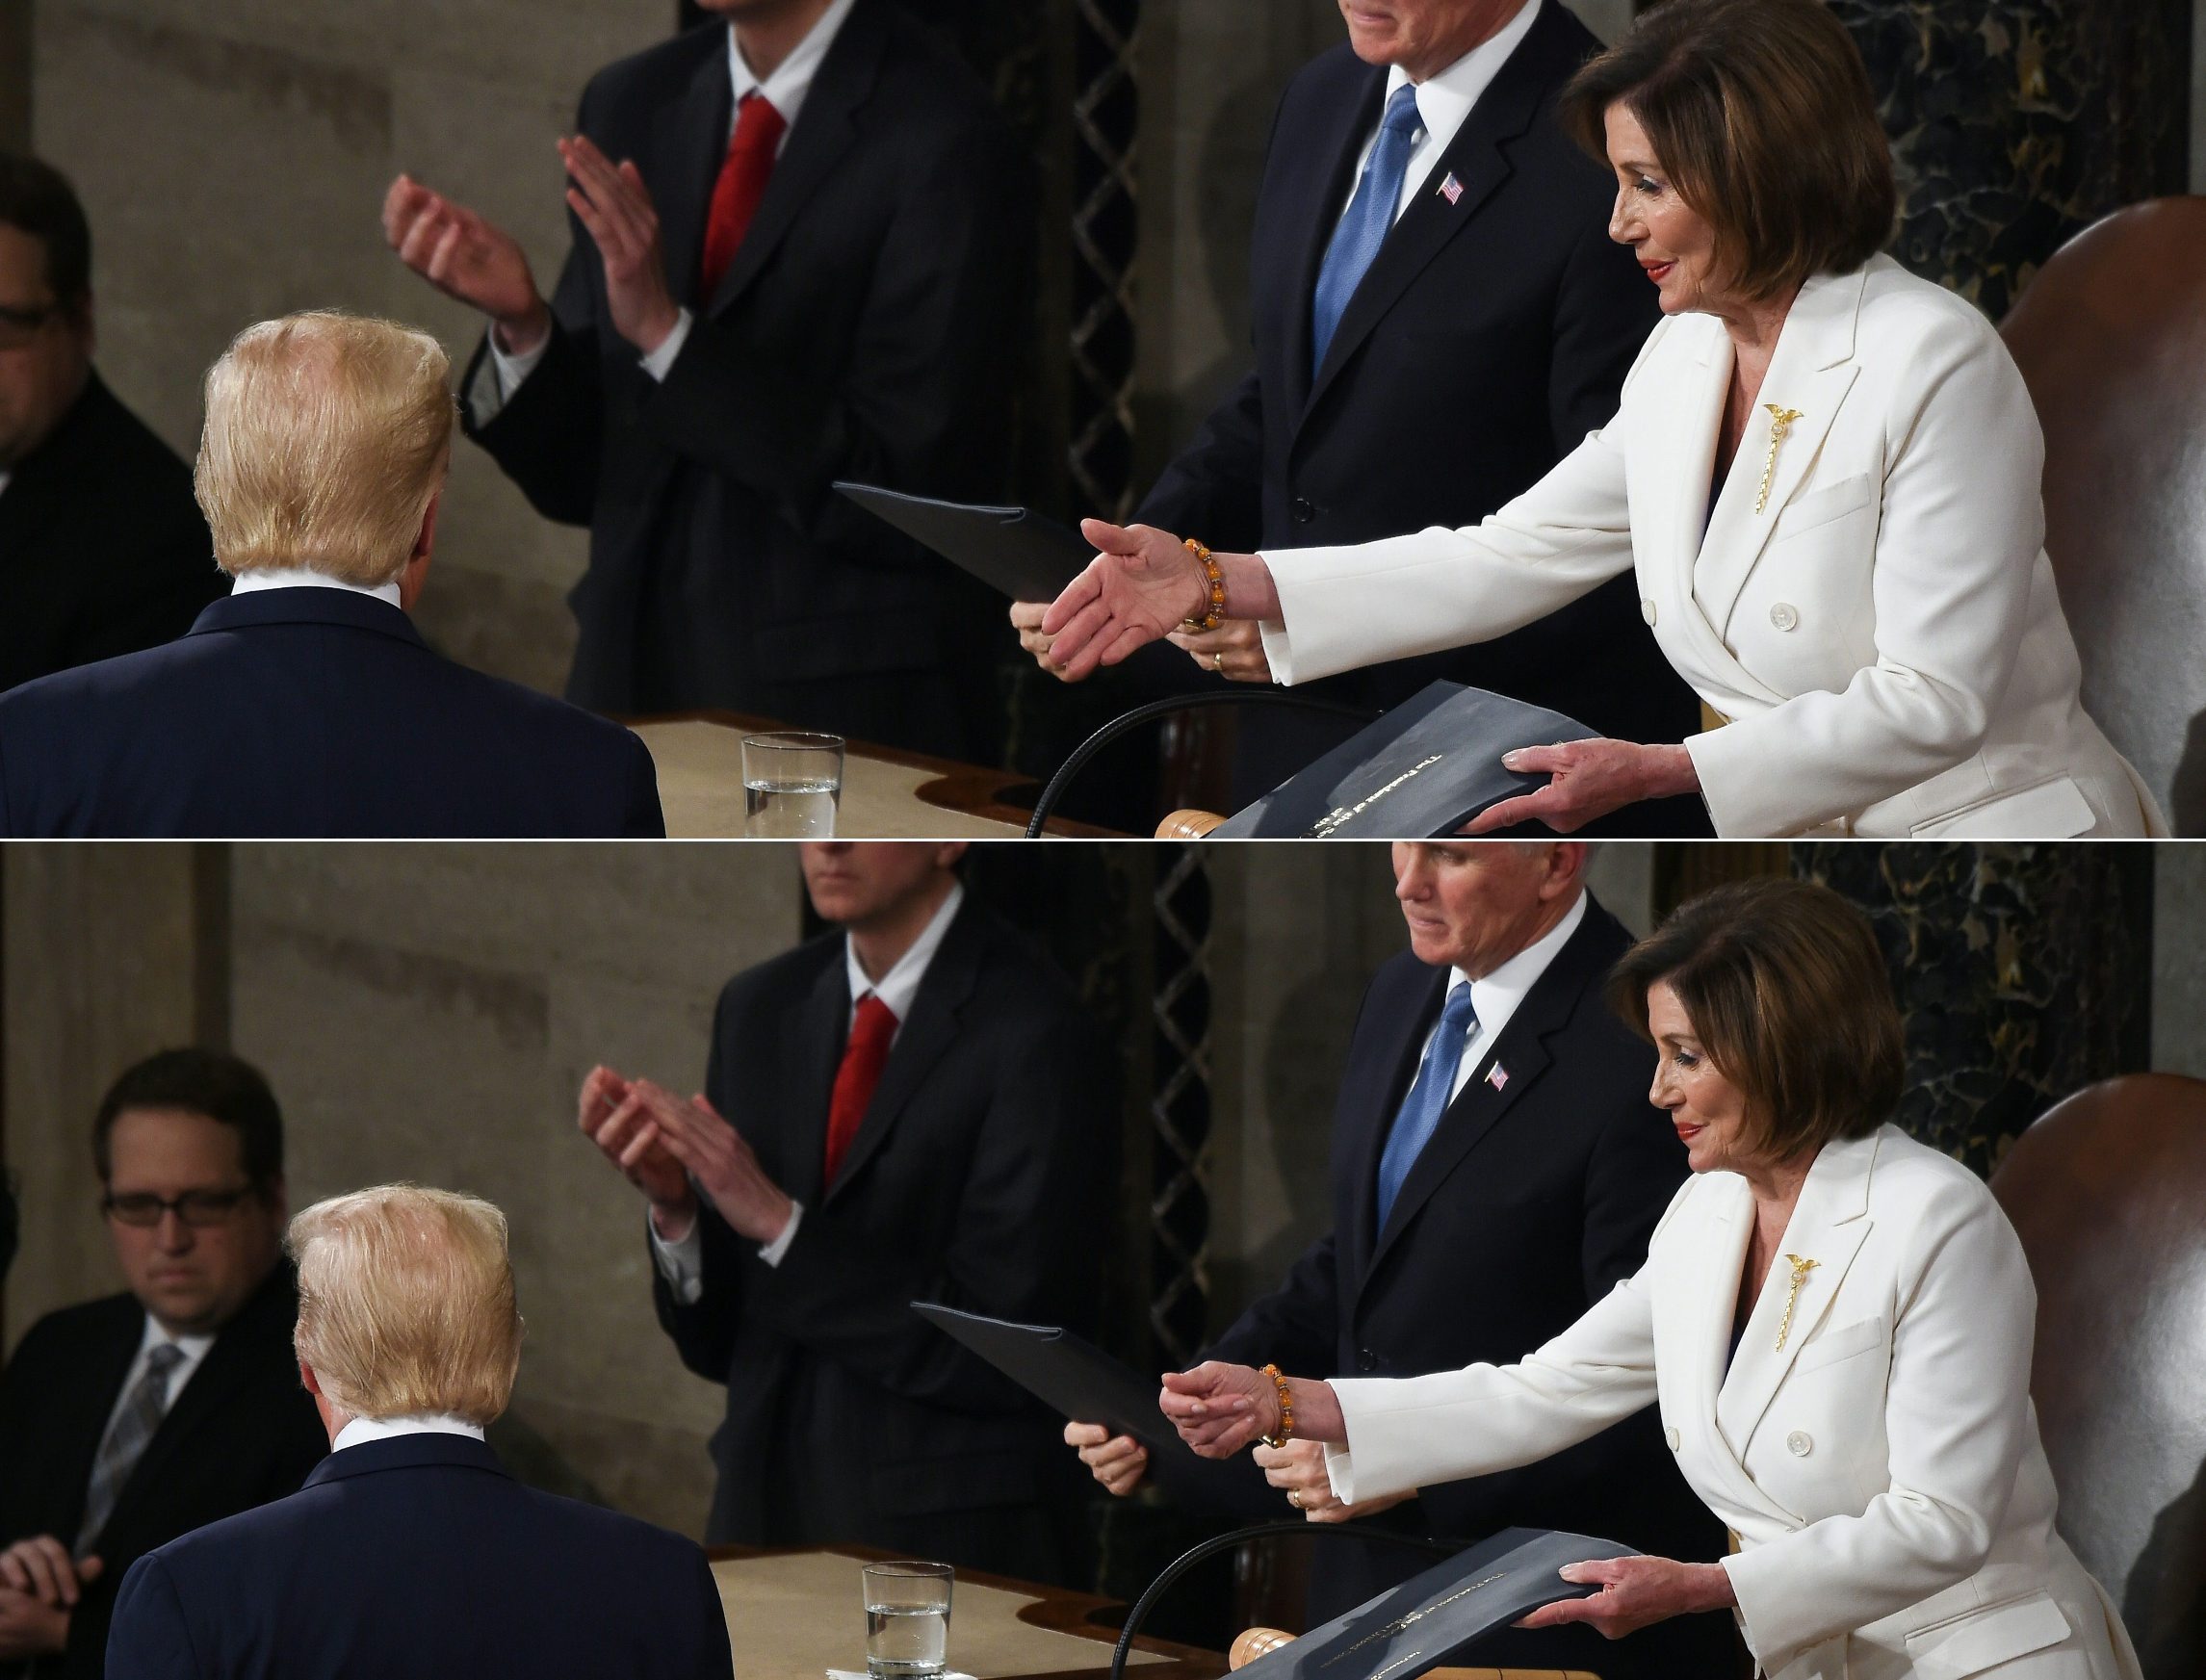 (COMBO) This combination of pictures created on February 04, 2020 shows Speaker of the US House of Representatives Nancy Pelosi extending a hand to US president Donald Trump ahead of the State of the Union address at the US Capitol in Washington, DC, on February 4, 2020; and Speaker of the US House of Representatives Nancy Pelosi extends a hand to US president Donald Trump ahead of the State of the Union address at the US Capitol in Washington, DC, on February 4, 2020. (Photos by Olivier DOULIERY / AFP)